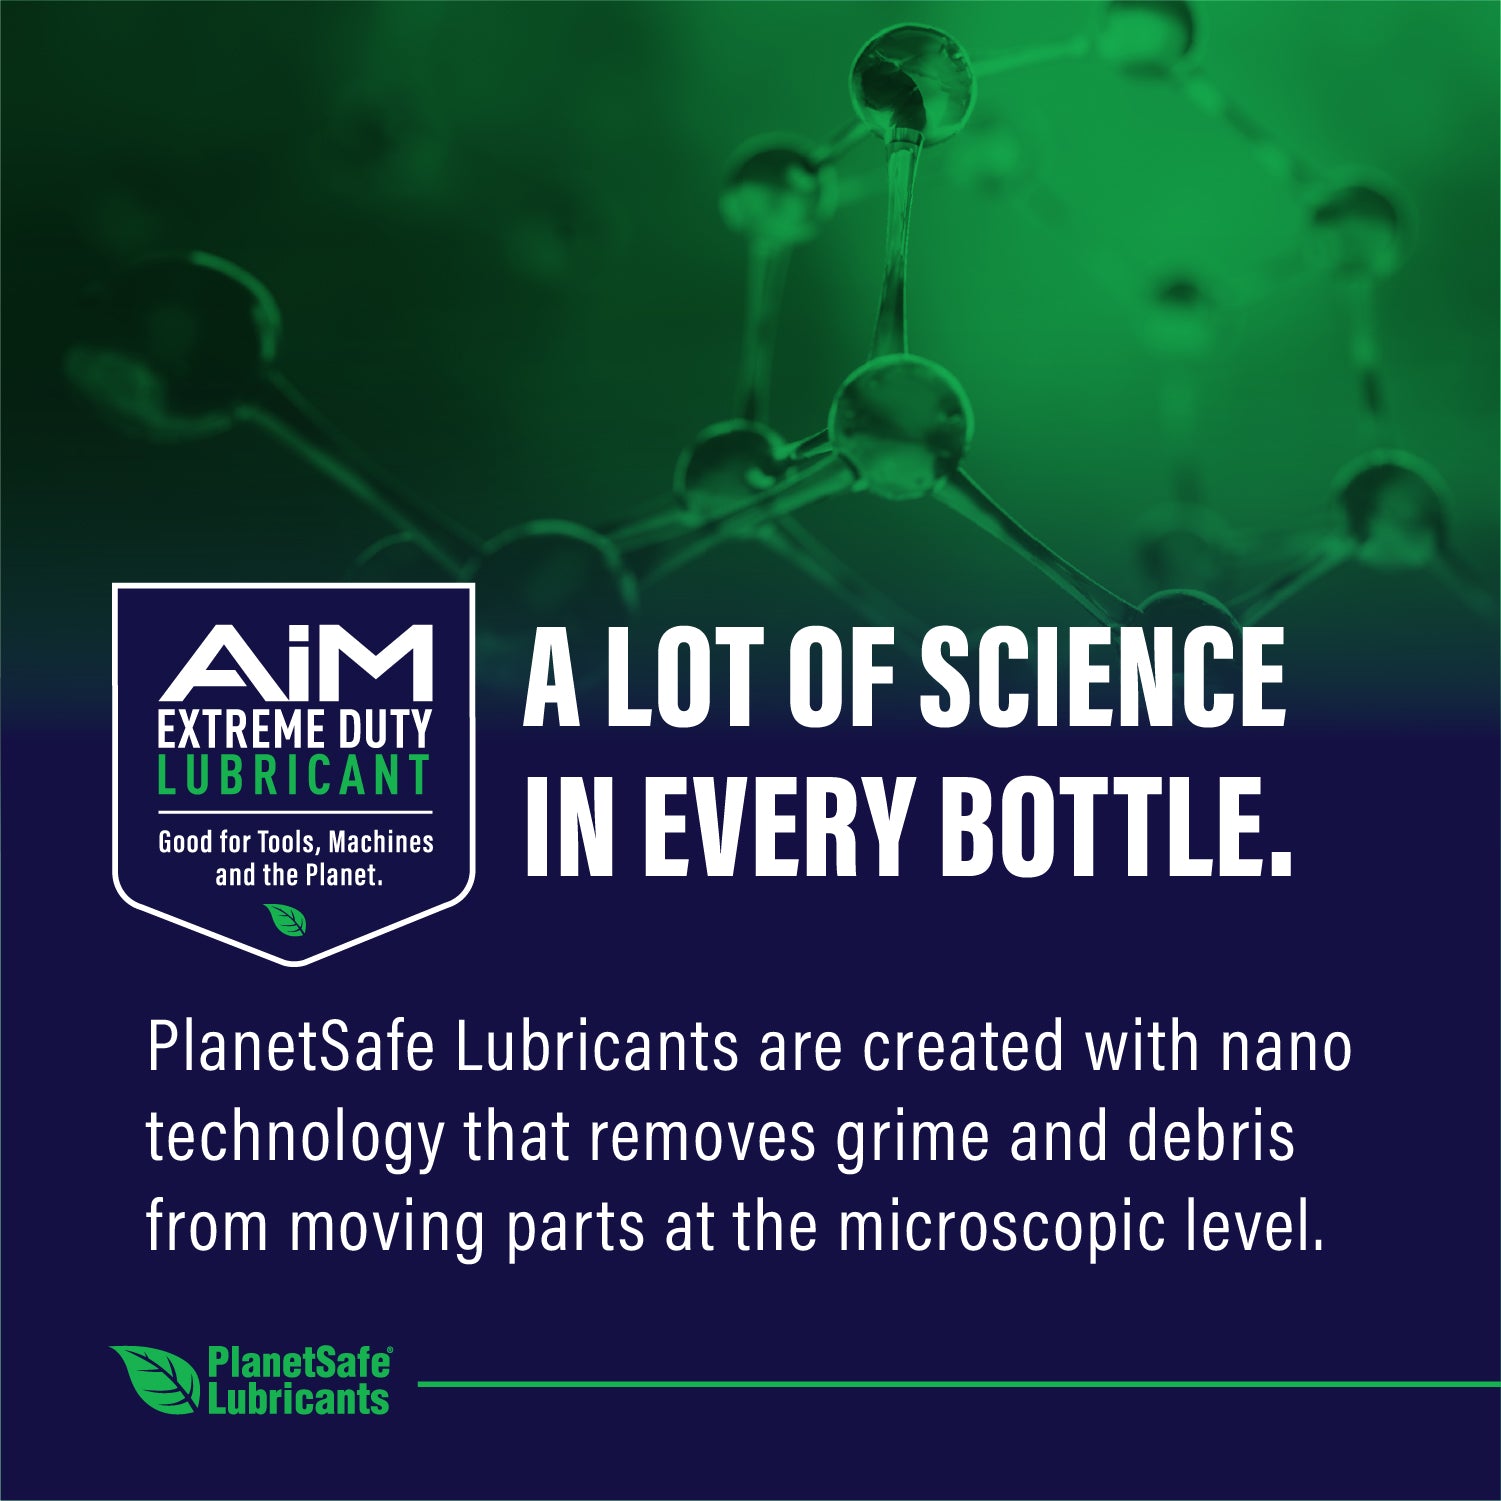 https://planetsafelubricants.com/cdn/shop/products/PlanetSafe-Lubricants-AIM-a-lot-of-science-in-every-bottle-best-all-purpose-oil-lube-proven-wd-40-substitute-alternative_23a69fbb-22ed-491e-814c-d174c98e053b_2048x2048.jpg?v=1703392861